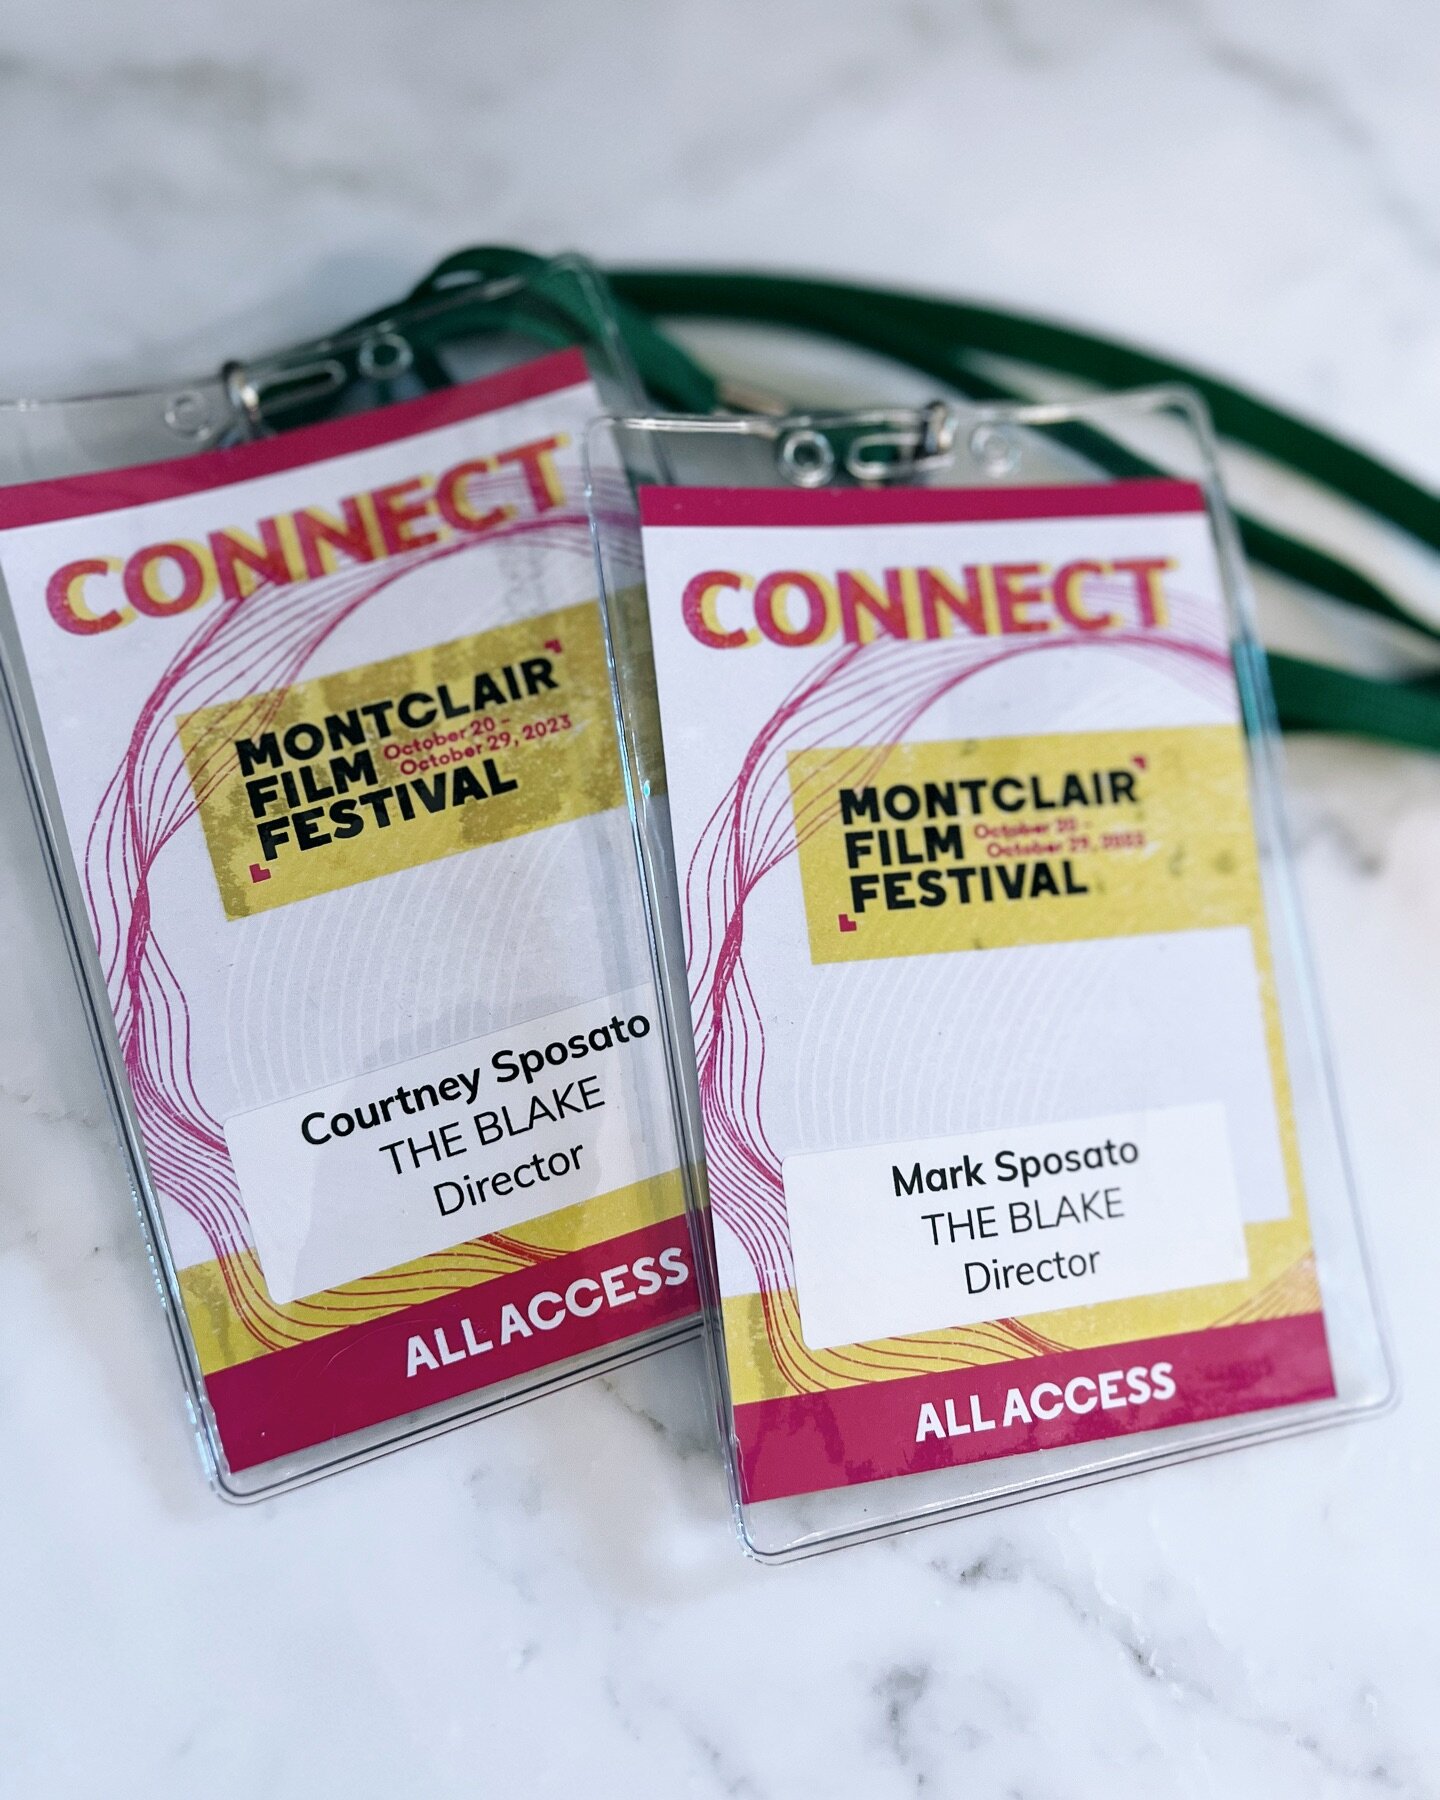 Remembering our amazing time at Montclair Film Festival. So grateful to be supported by this incredible community 🎥 🎞️ 

#mff #mff23 #montclairfilmfestival #filmfestival #filmmakers #filmcommunity #njfilmmaker #njfilm